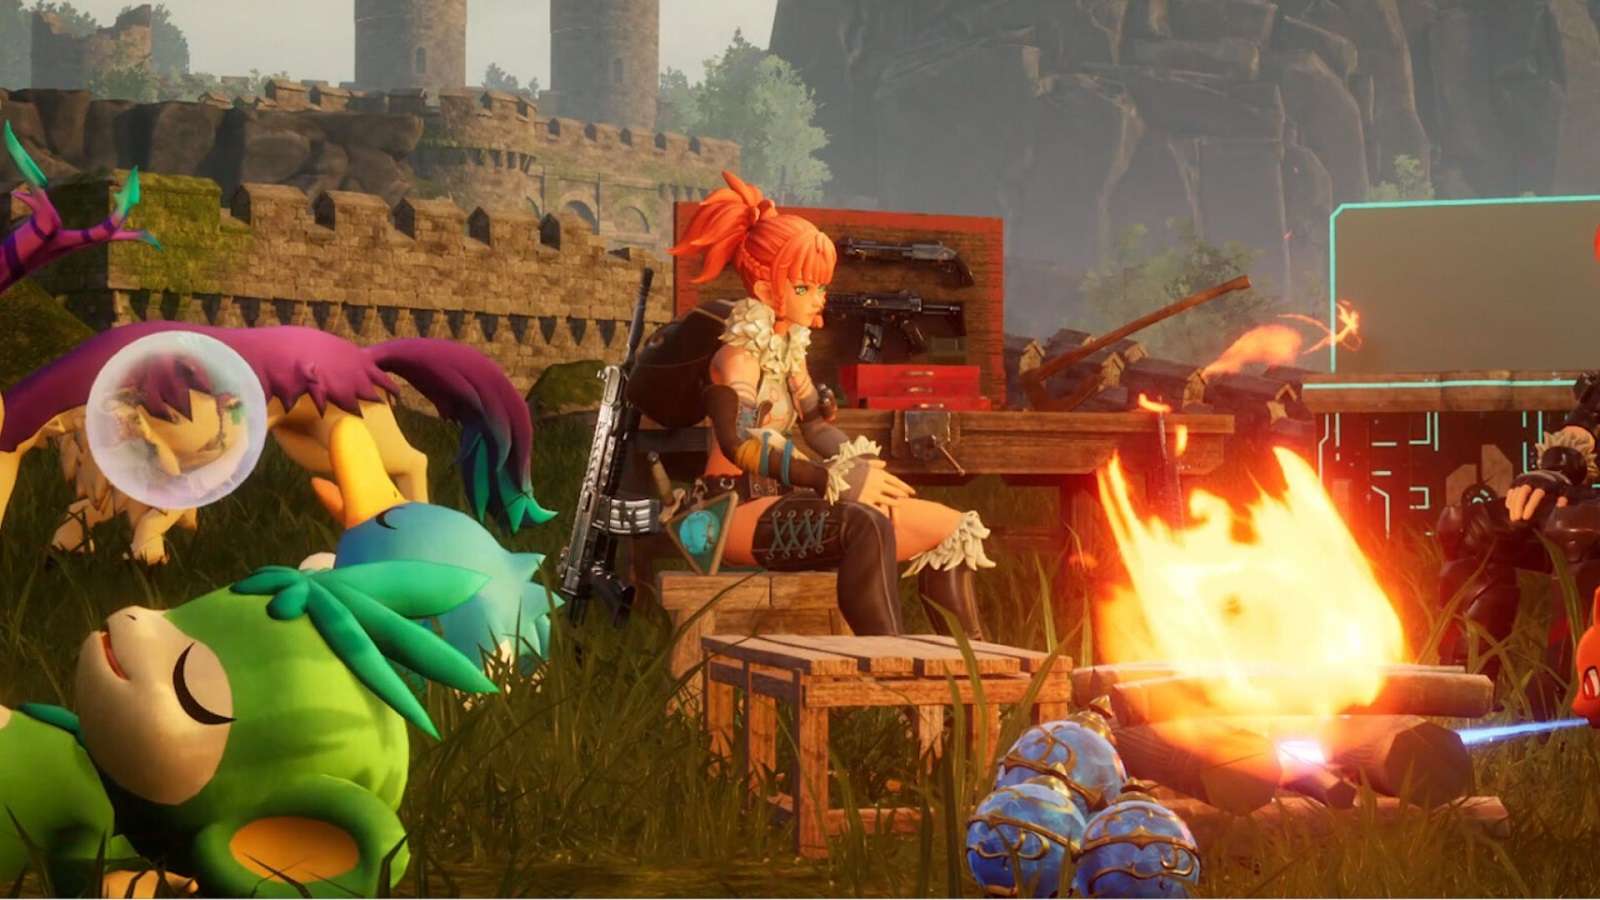 Palworld character sitting next to a fire